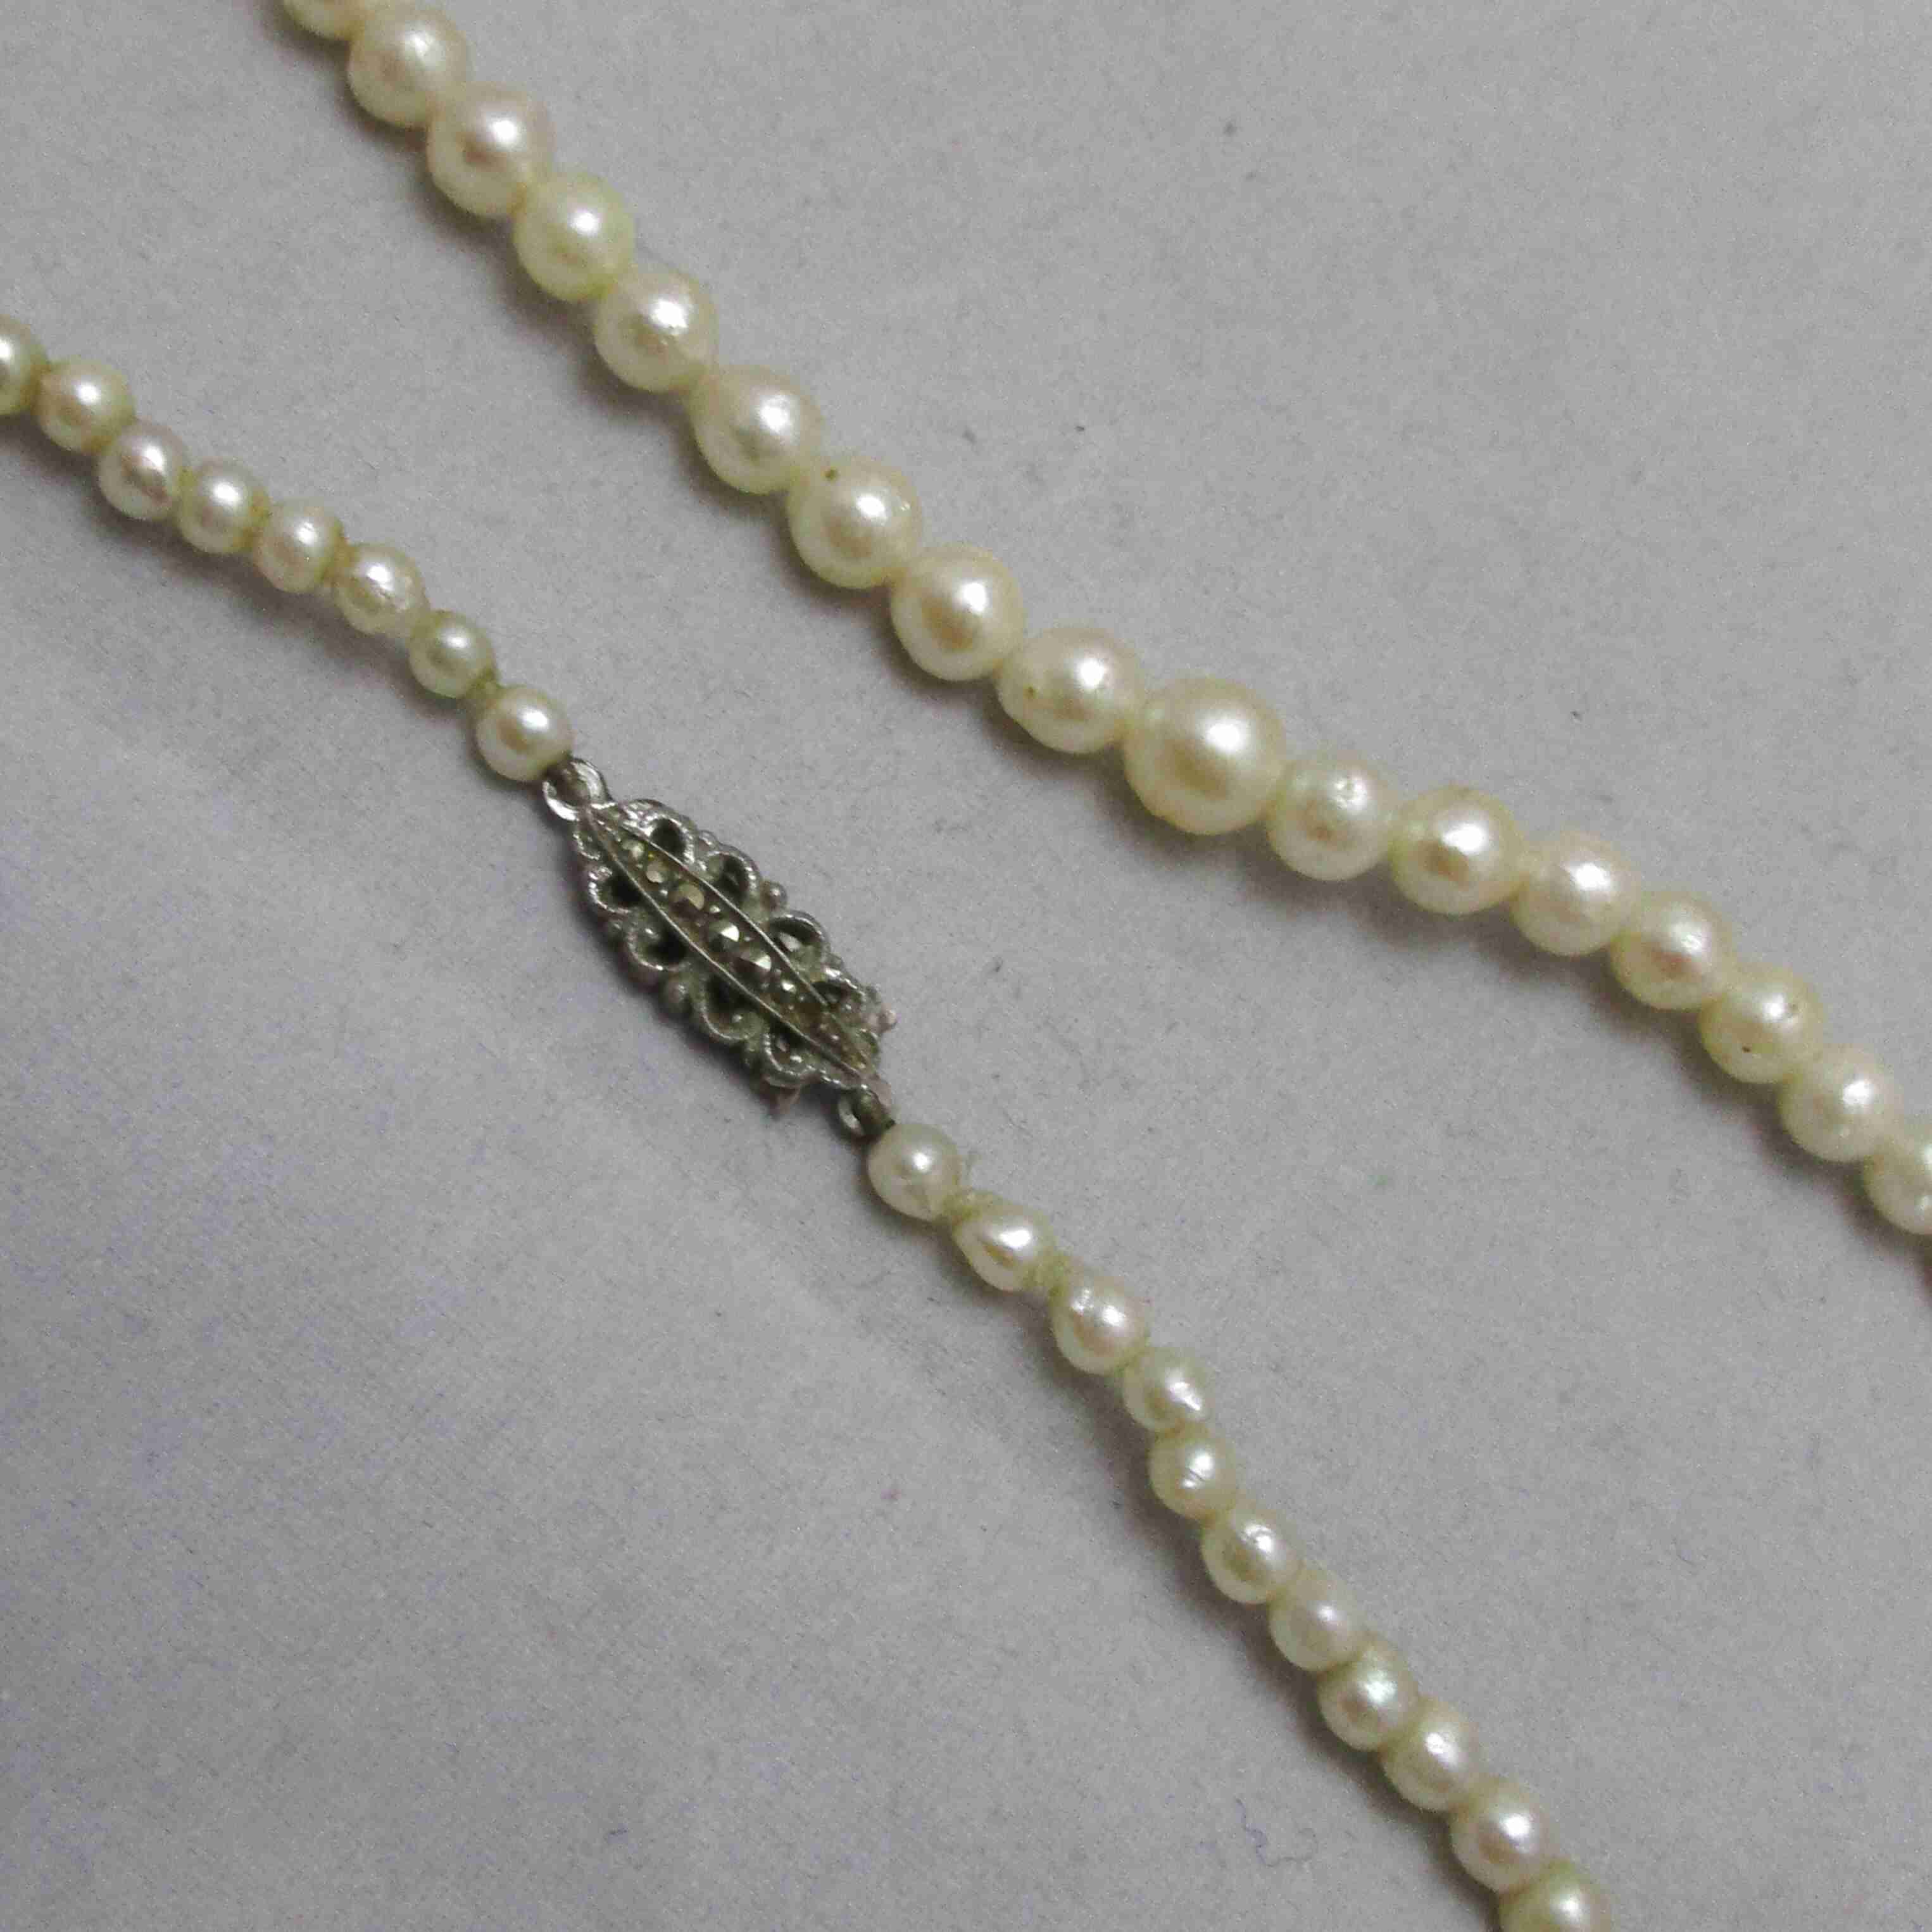 Antique Pearls Necklace for sale in UK | 69 used Antique Pearls Necklaces